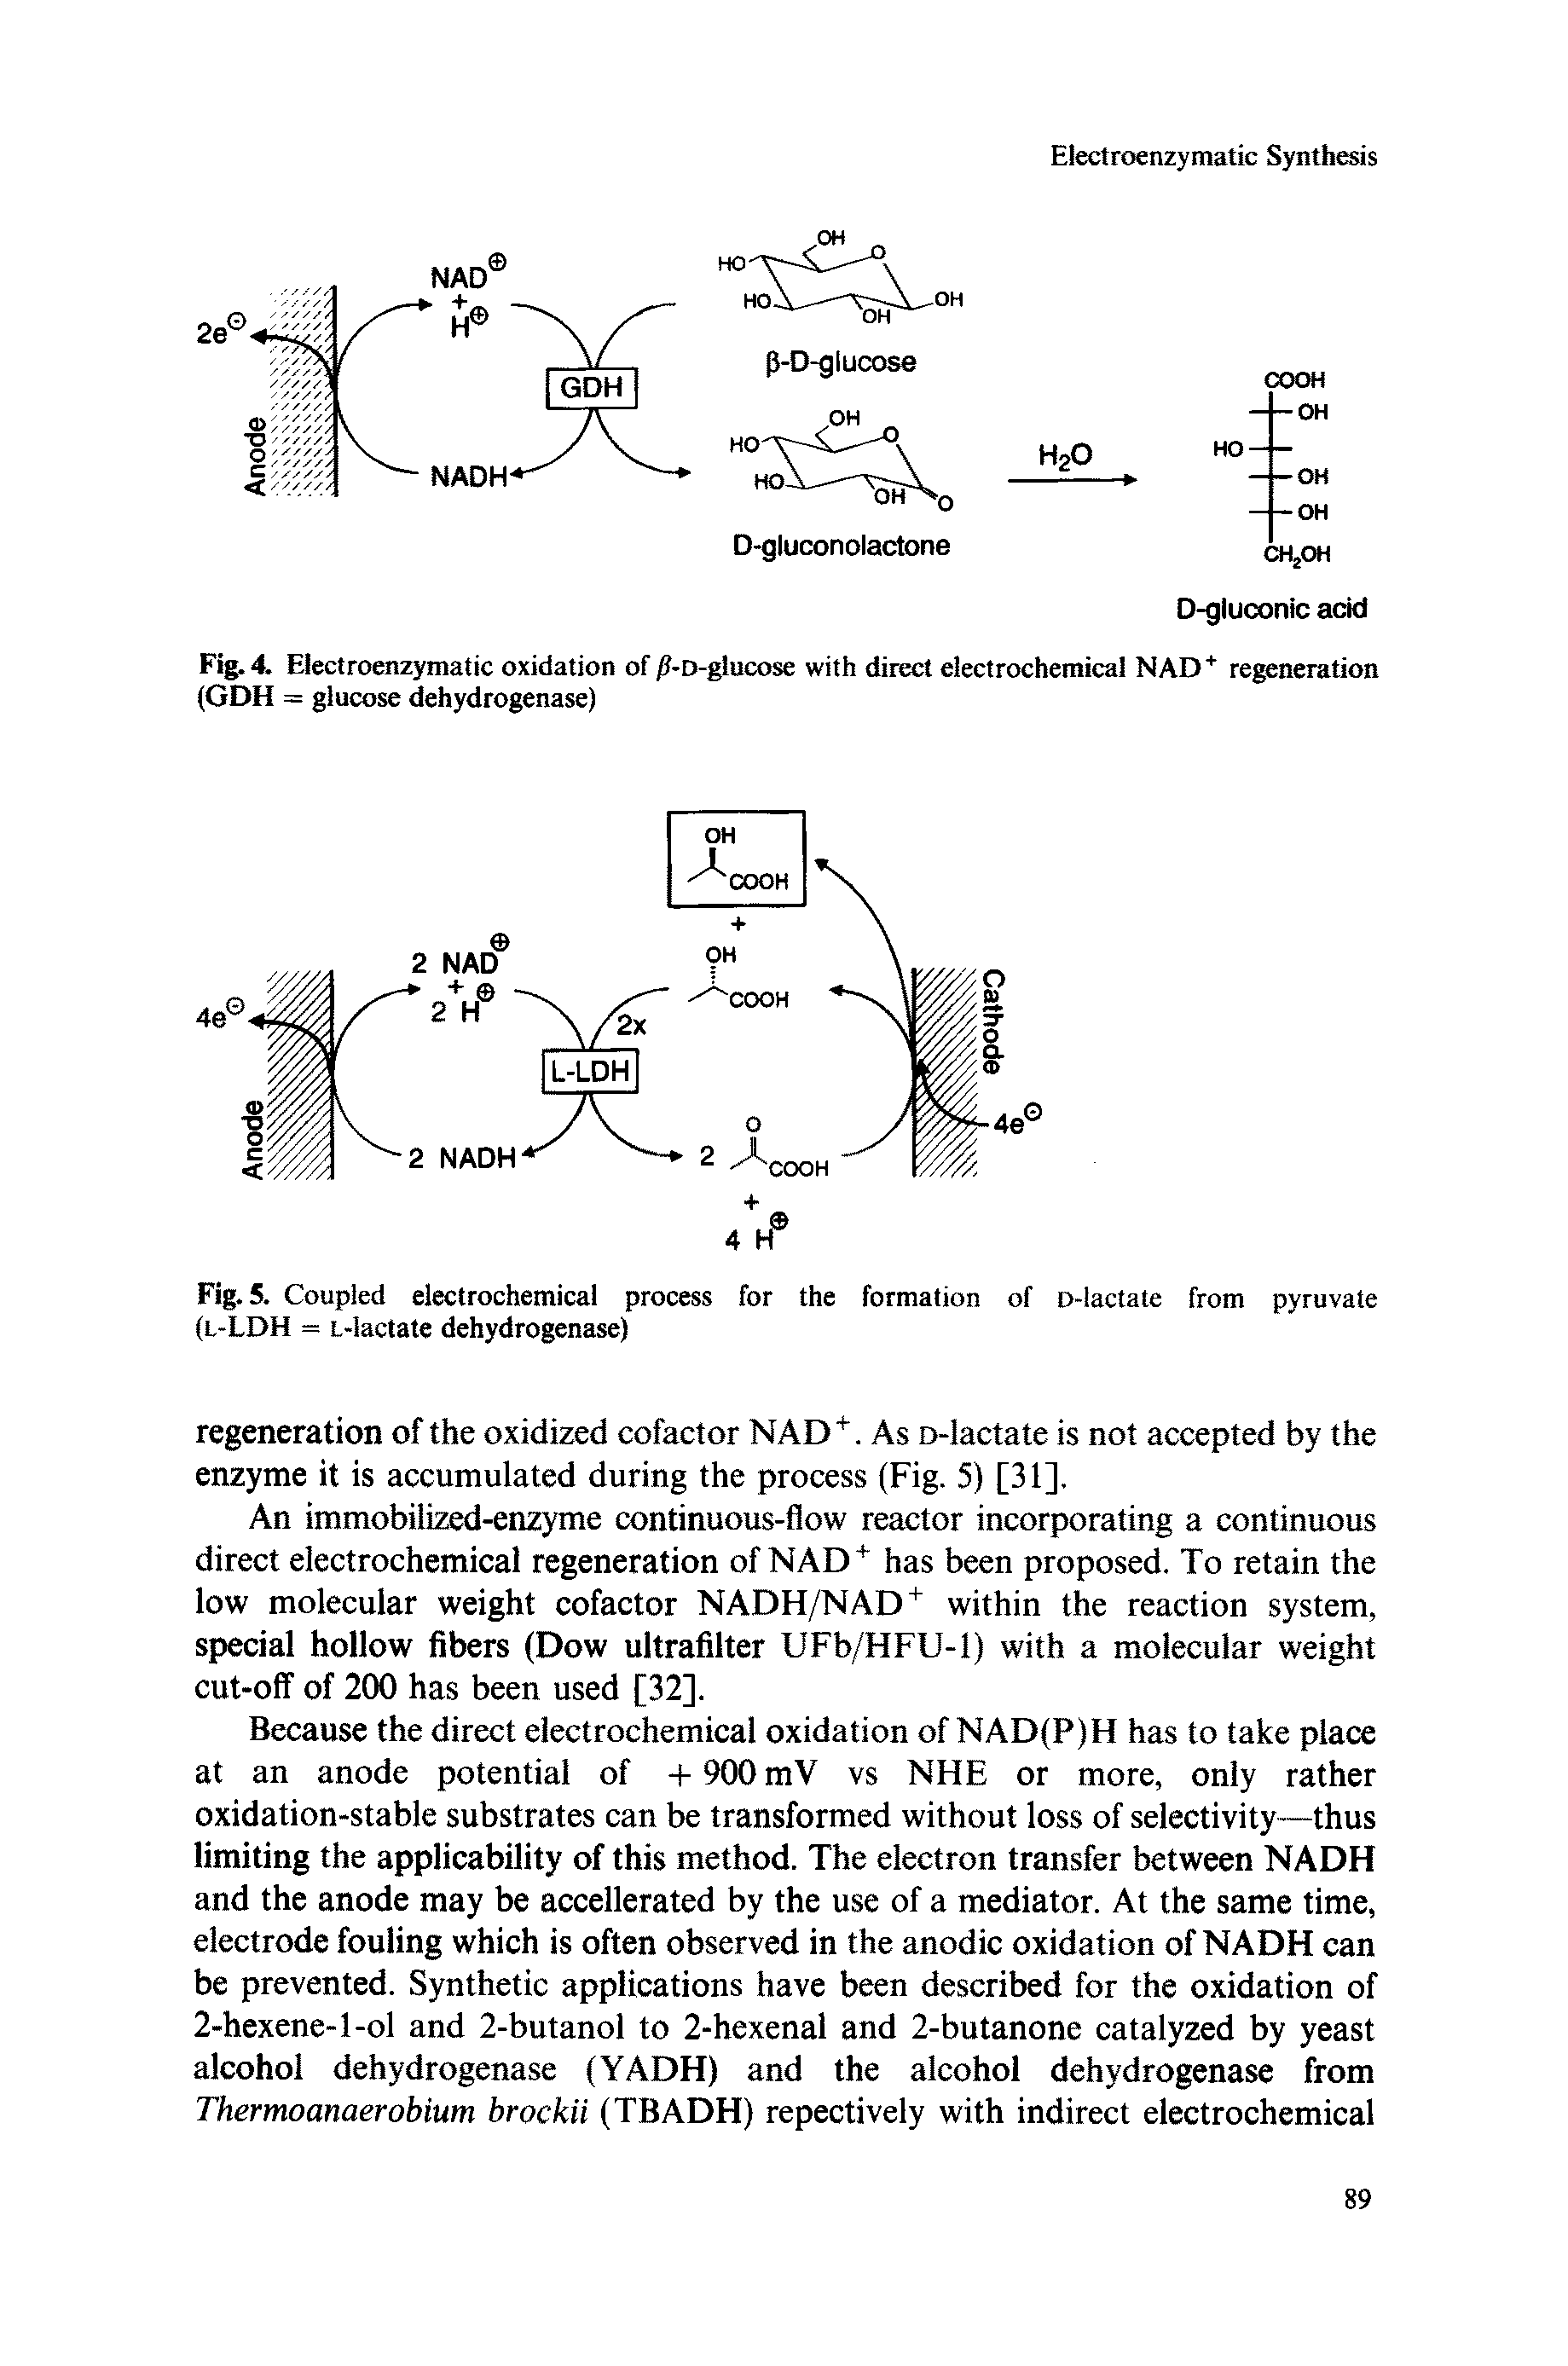 Fig. 5. Coupled electrochemical process for the formation of D-lactate from pyruvate (l-LDH = L-lactate dehydrogenase)...